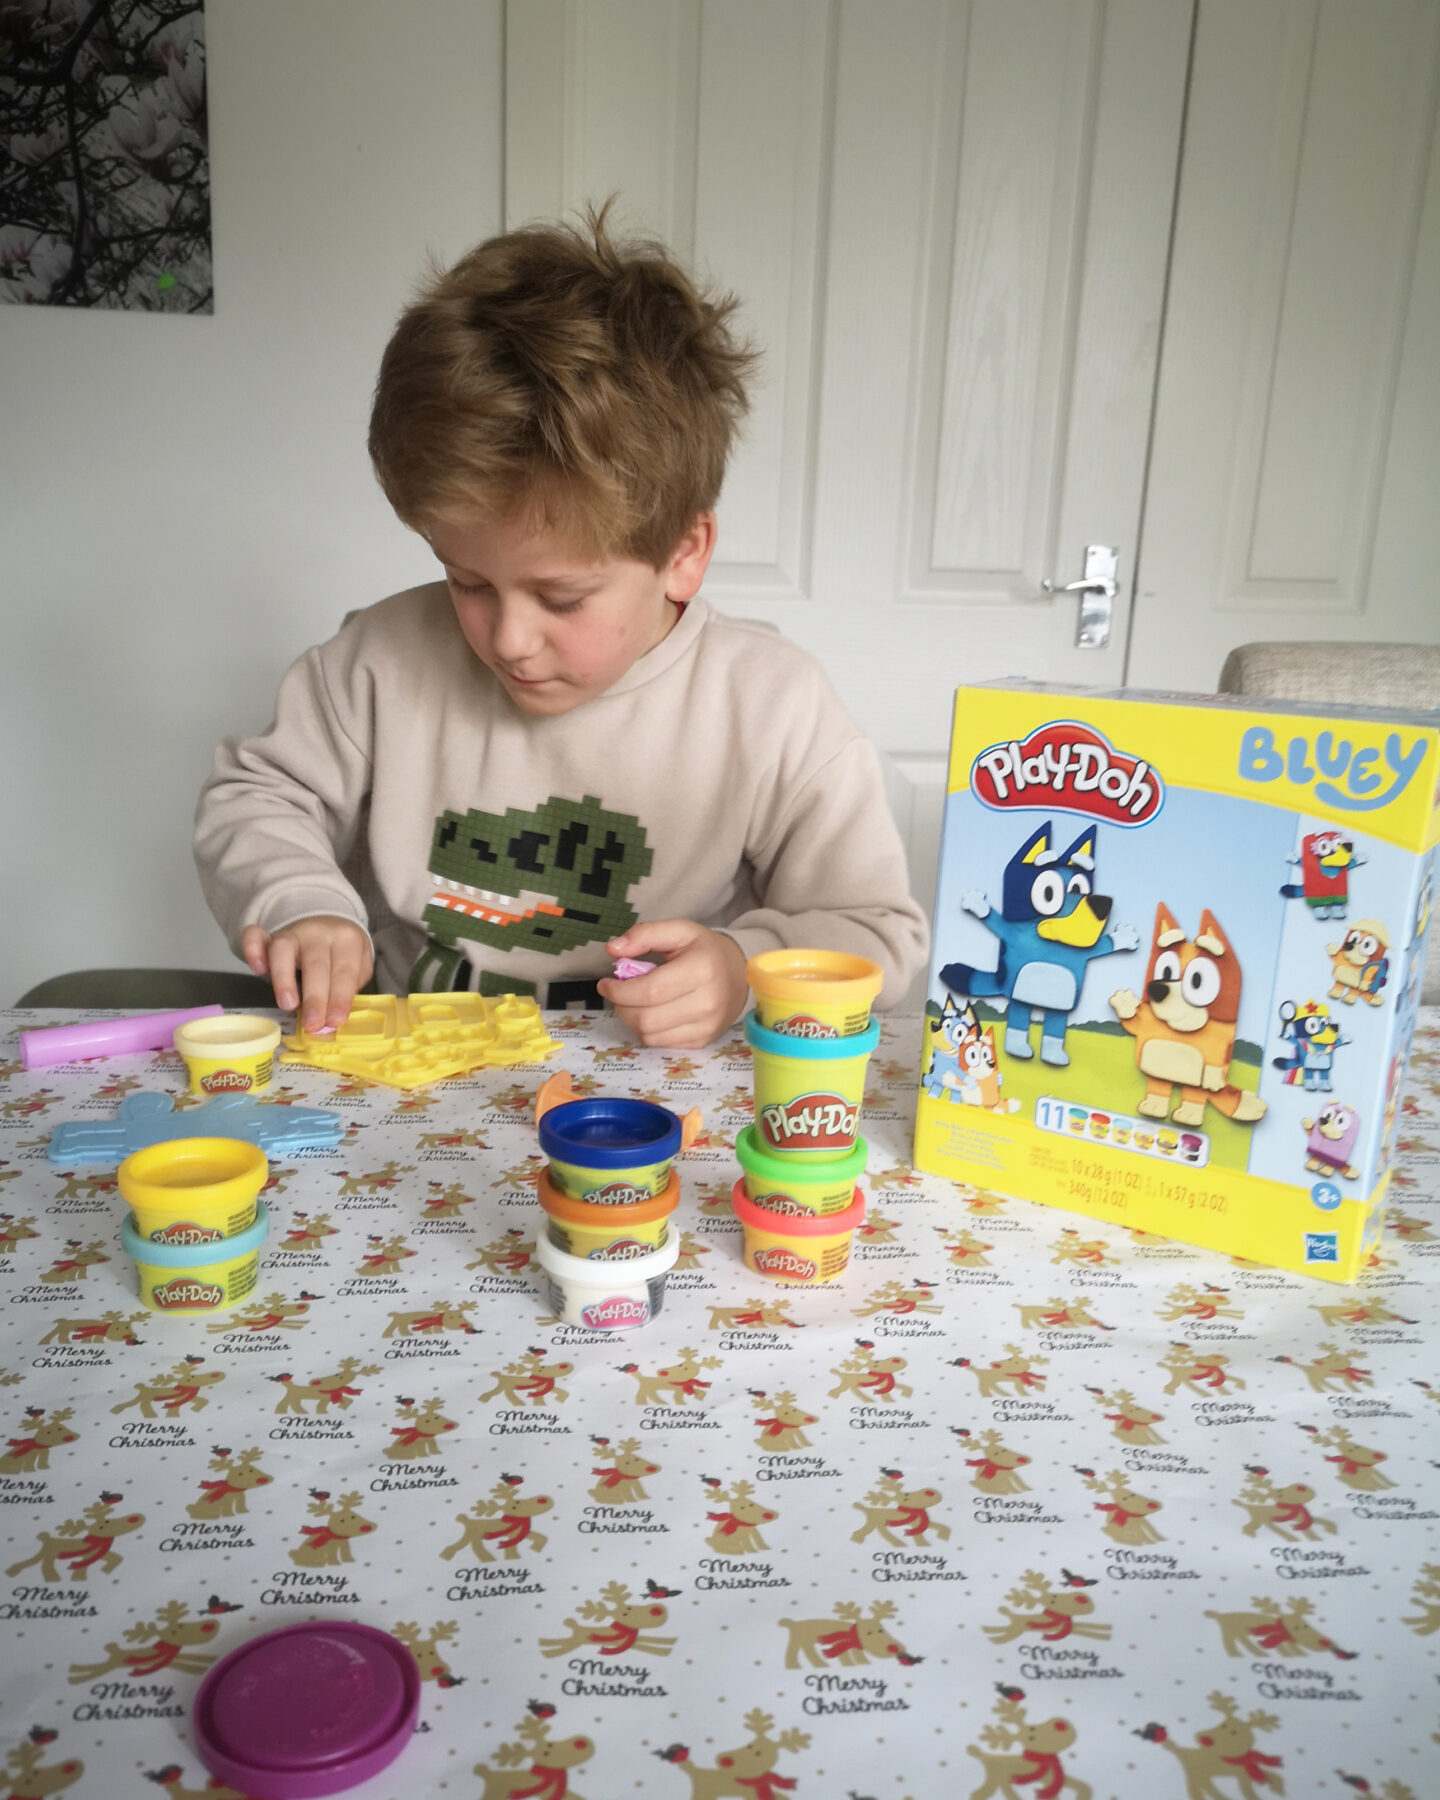 Christmas Ready With Very.co.uk, Very.co.uk, Christmas Shopping, Toys, Christmas Toys, Hot Wheels, Play-Doh, Fire Tablet, Christmas Wish List, Tonies, Kids Toys, Toys Reviews, The Frenchie Mummy